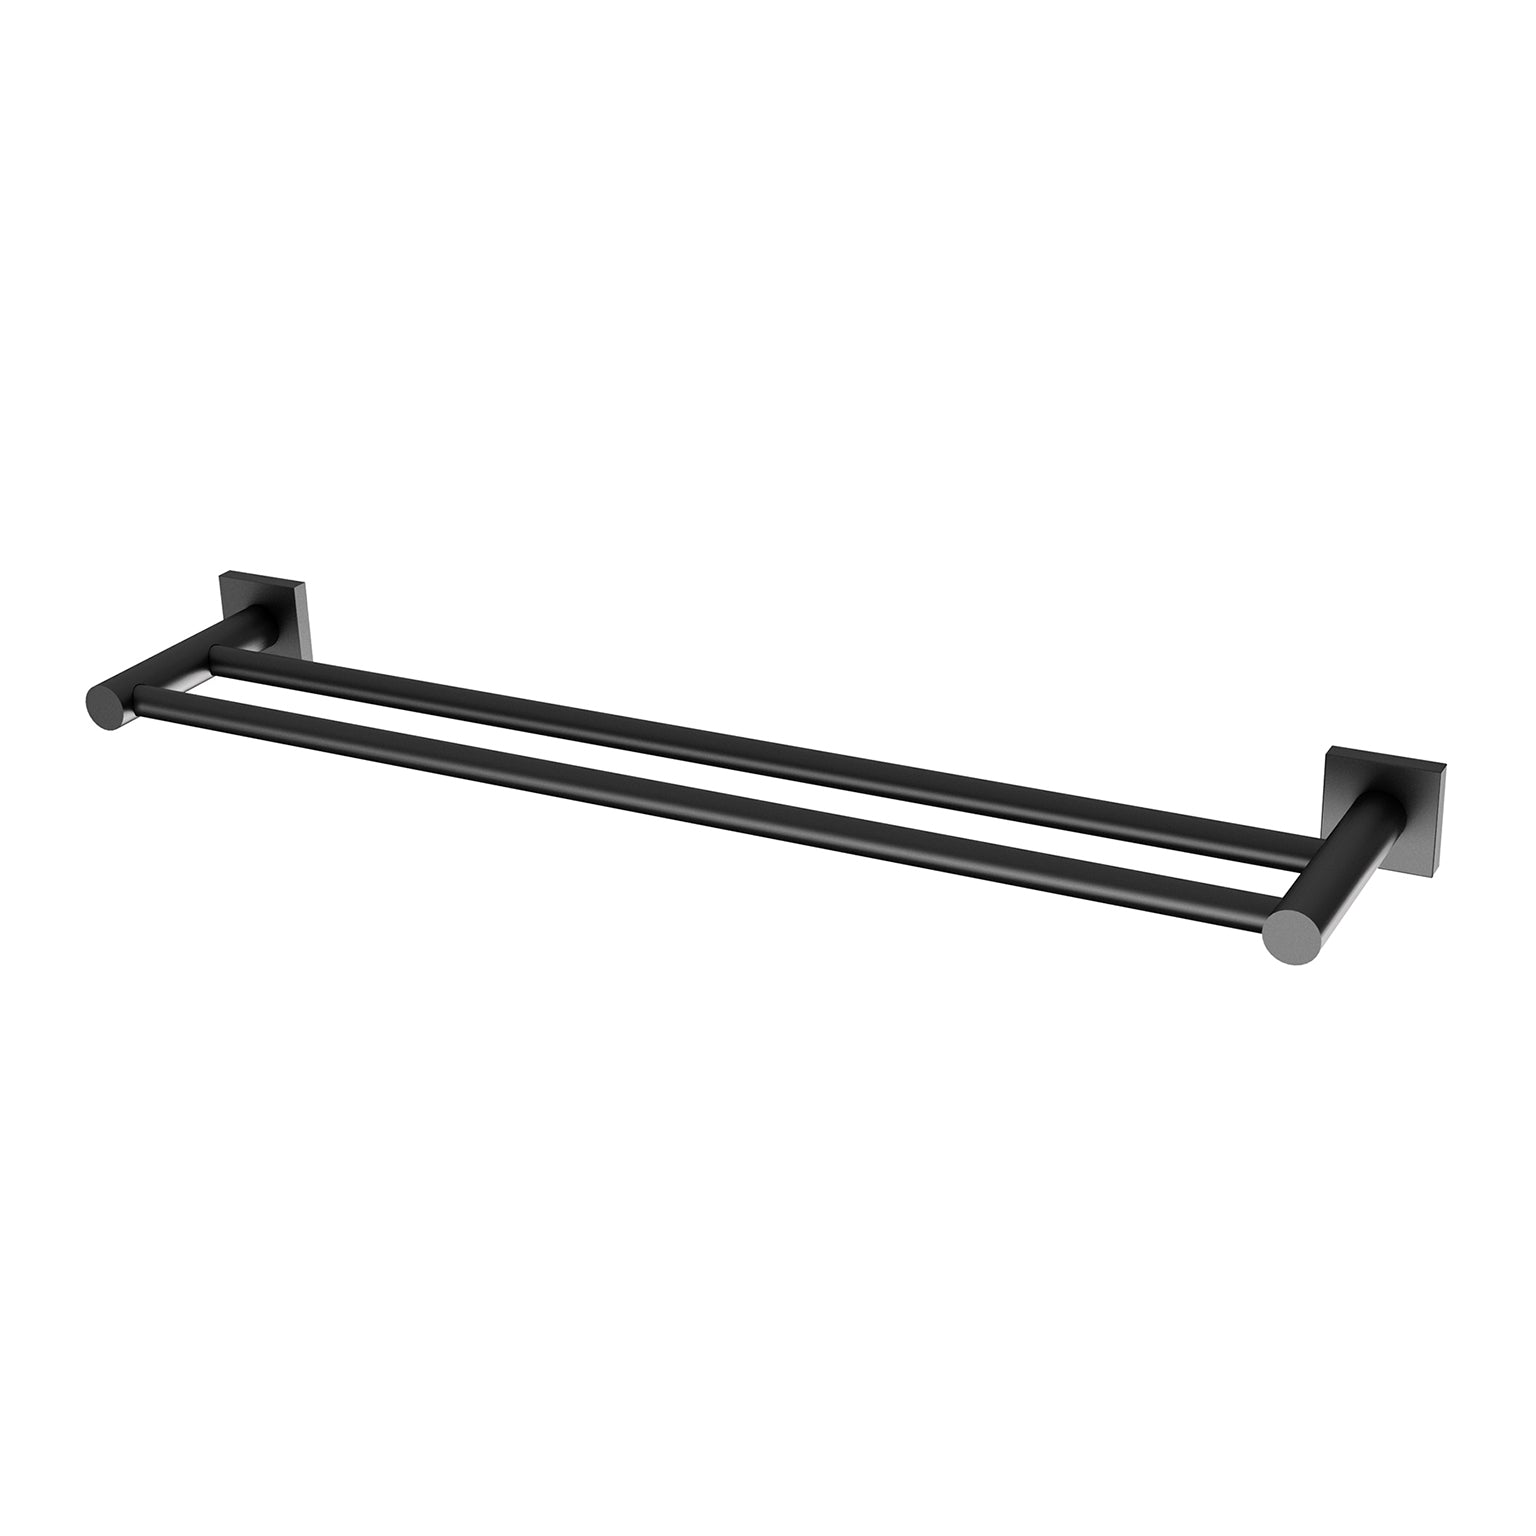 PHOENIX RADII DOUBLE NON-HEATED TOWEL RAIL SQUARE PLATE MATTE BLACK 600MM AND 800MM